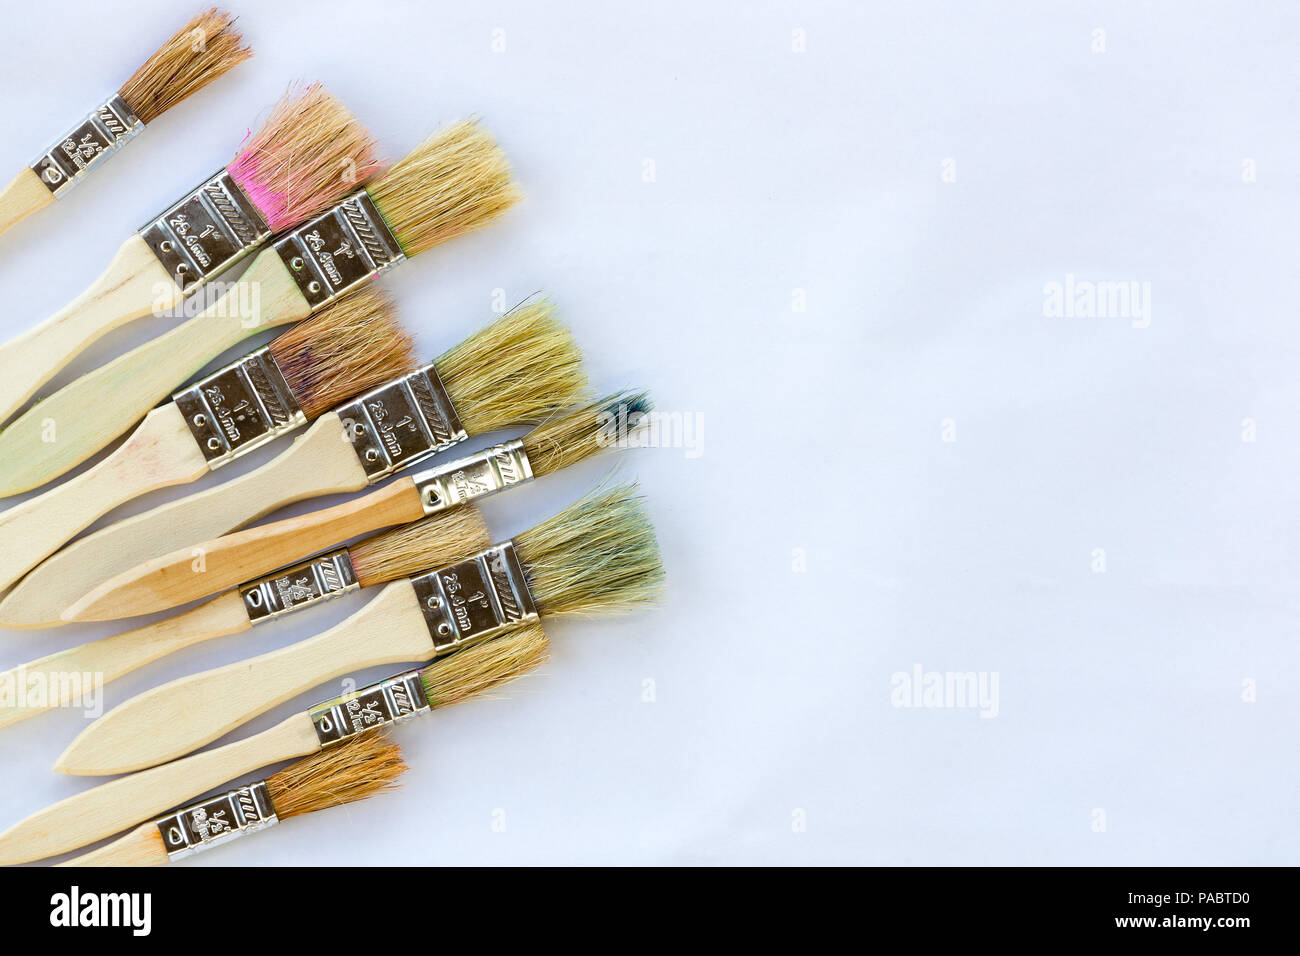 Used paint brushes against white paper with copy space ready for artwork Stock Photo